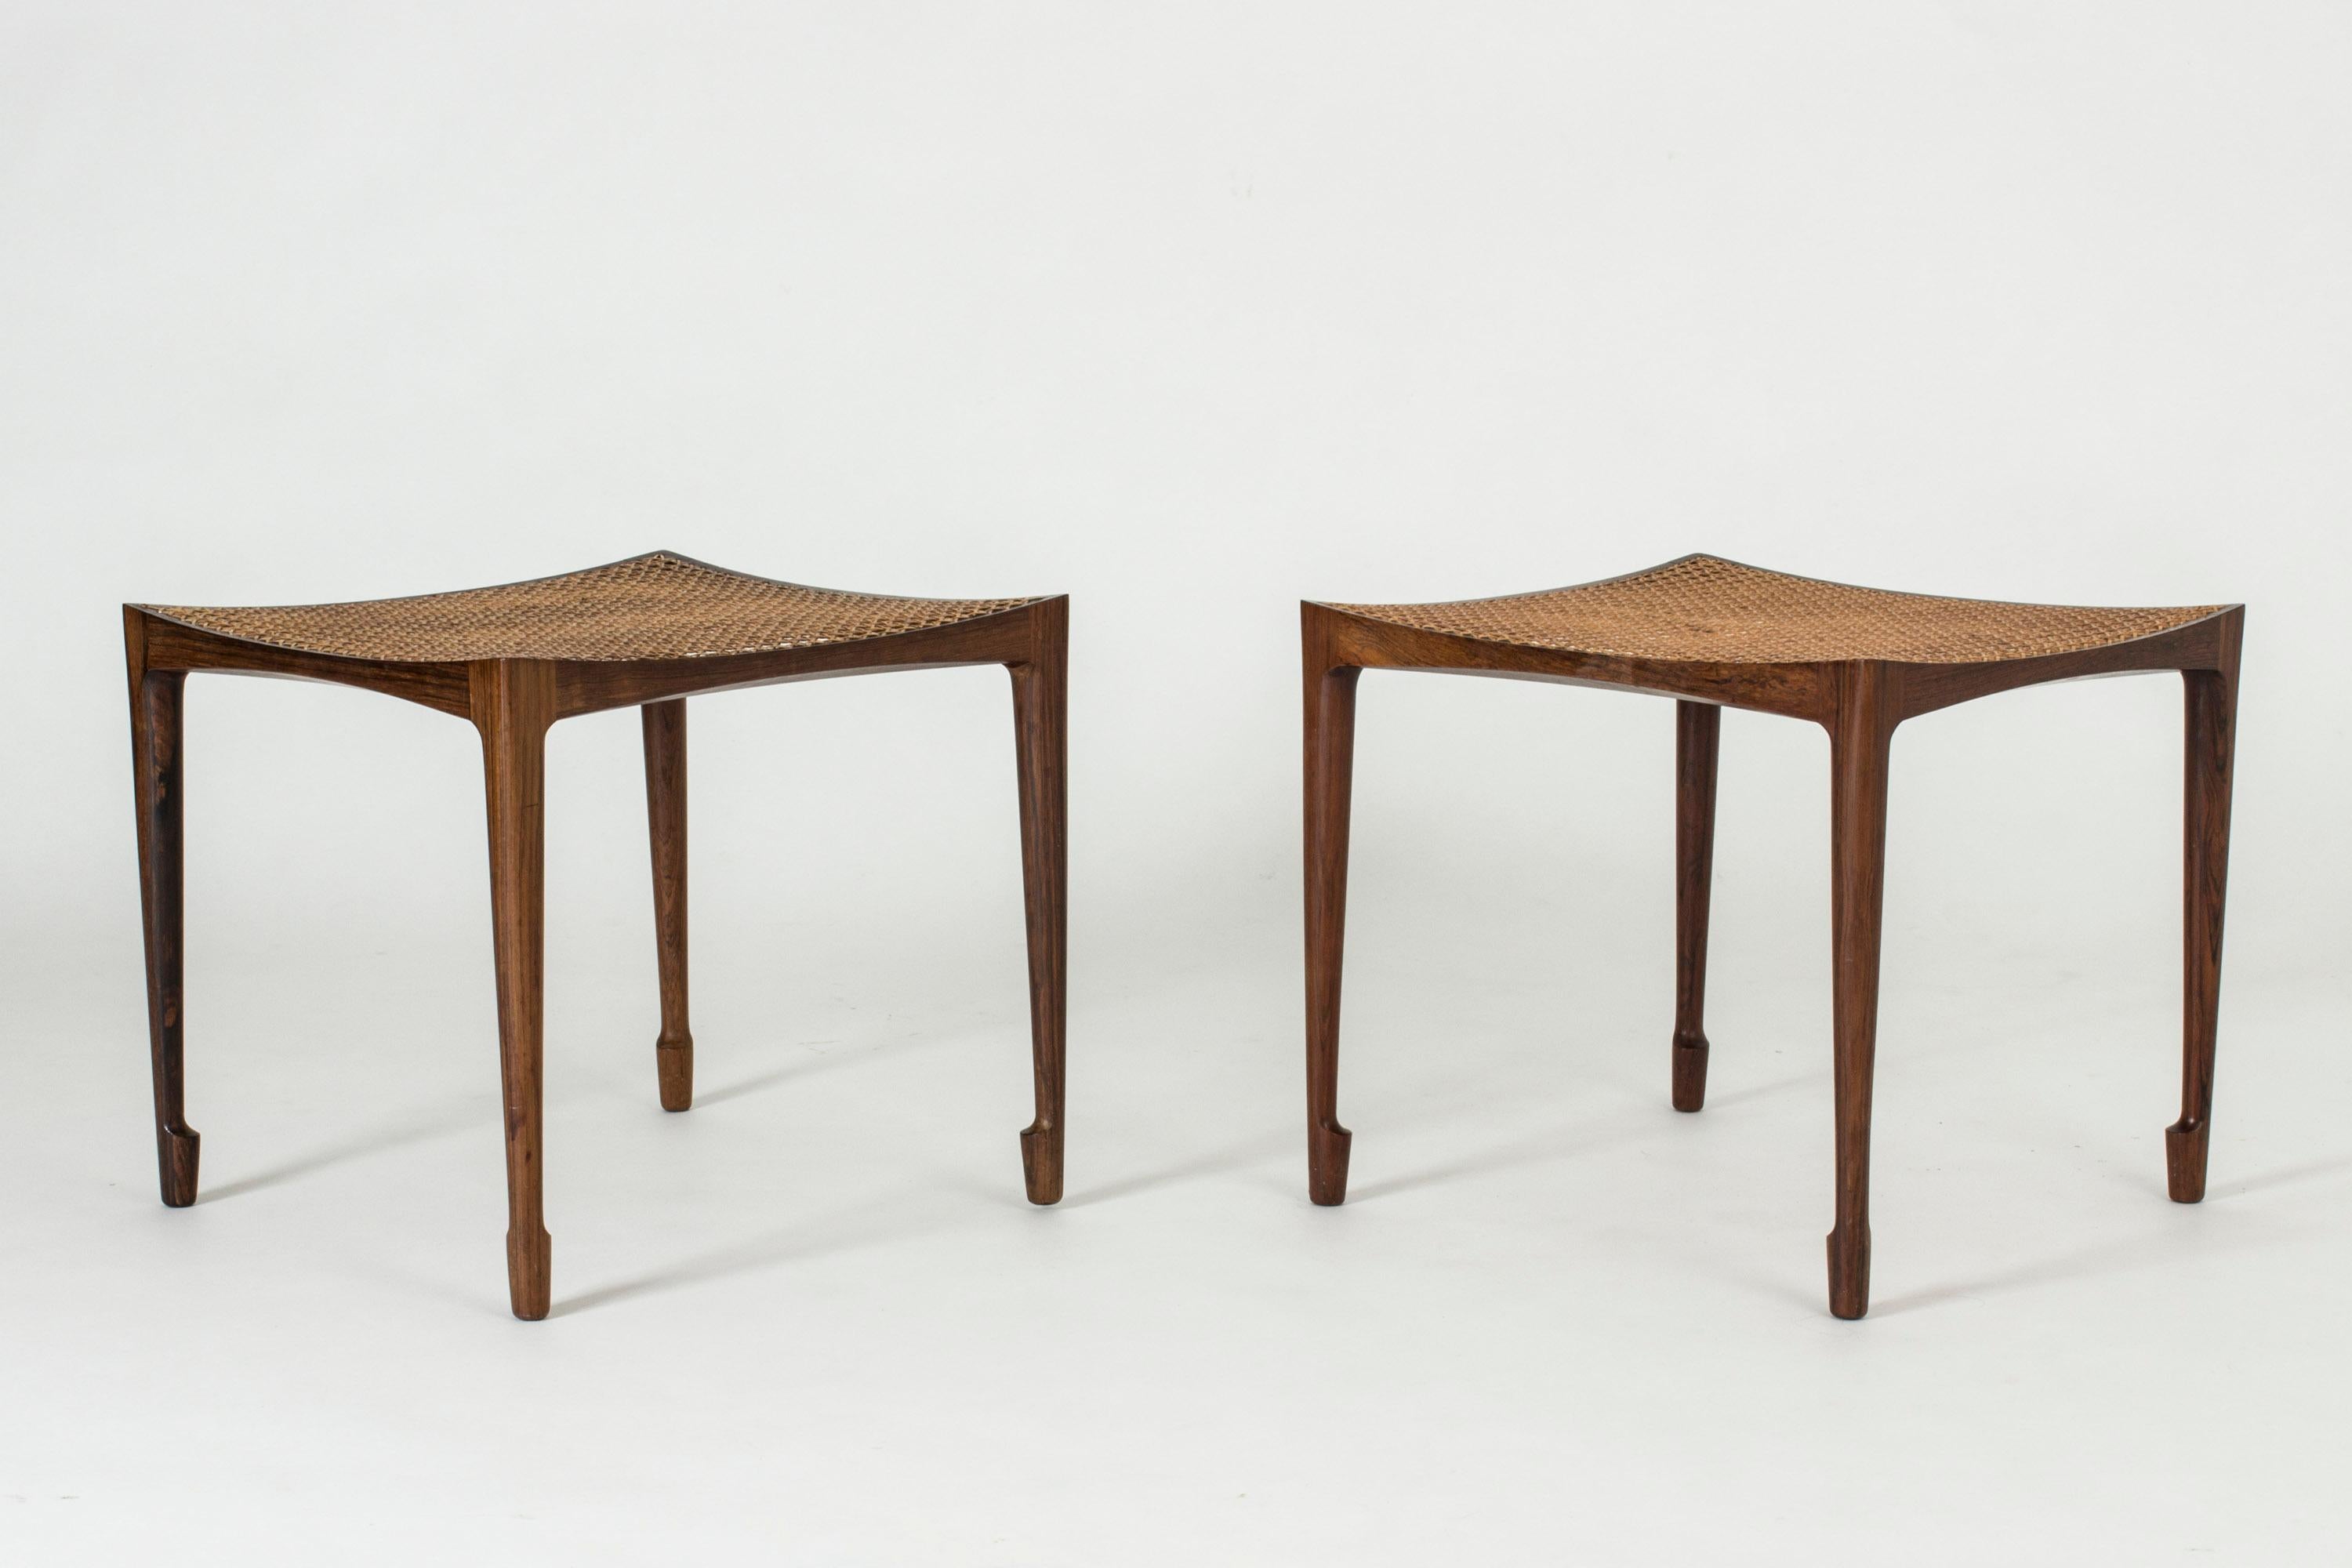 Pair of stunning rosewood and rattan stools by Bernt Petersen. Beautiful, slender design with sculpted legs and seats that are subtly concave.